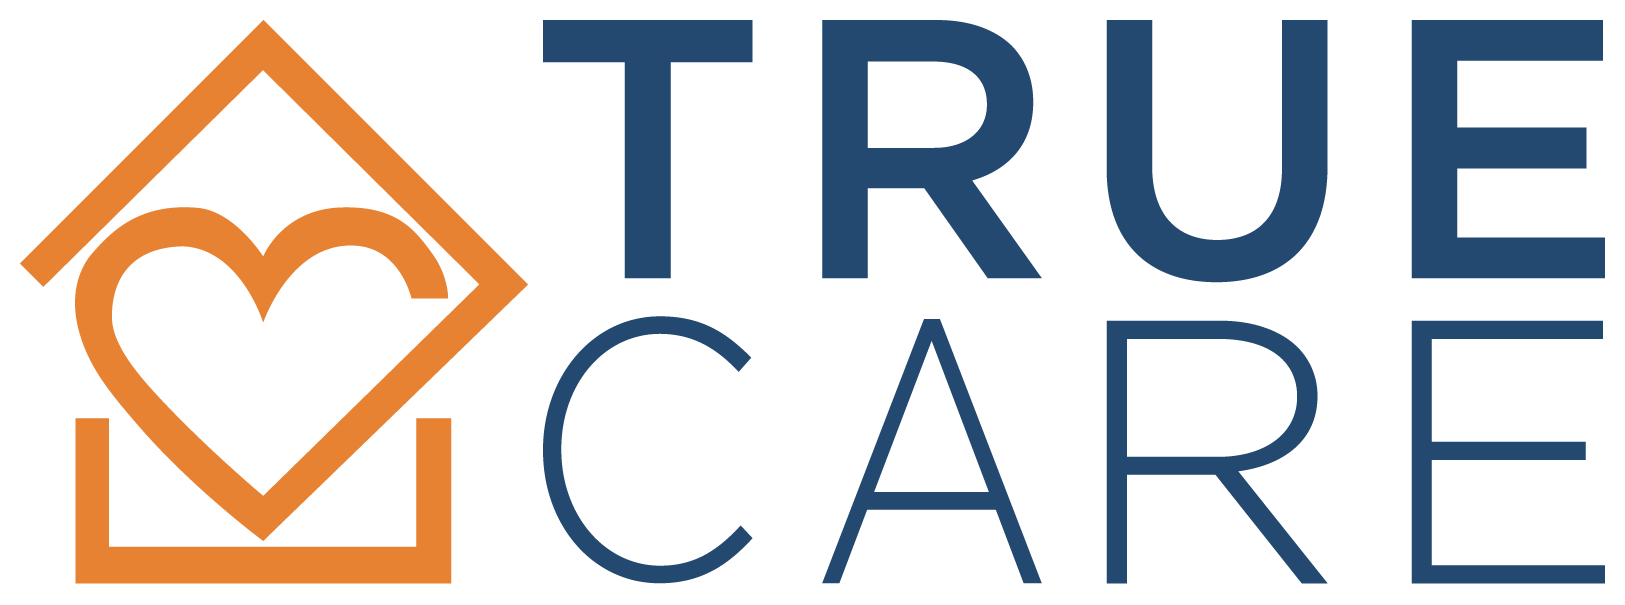 True Care provides personal home care across the 5 boroughs and Westchester